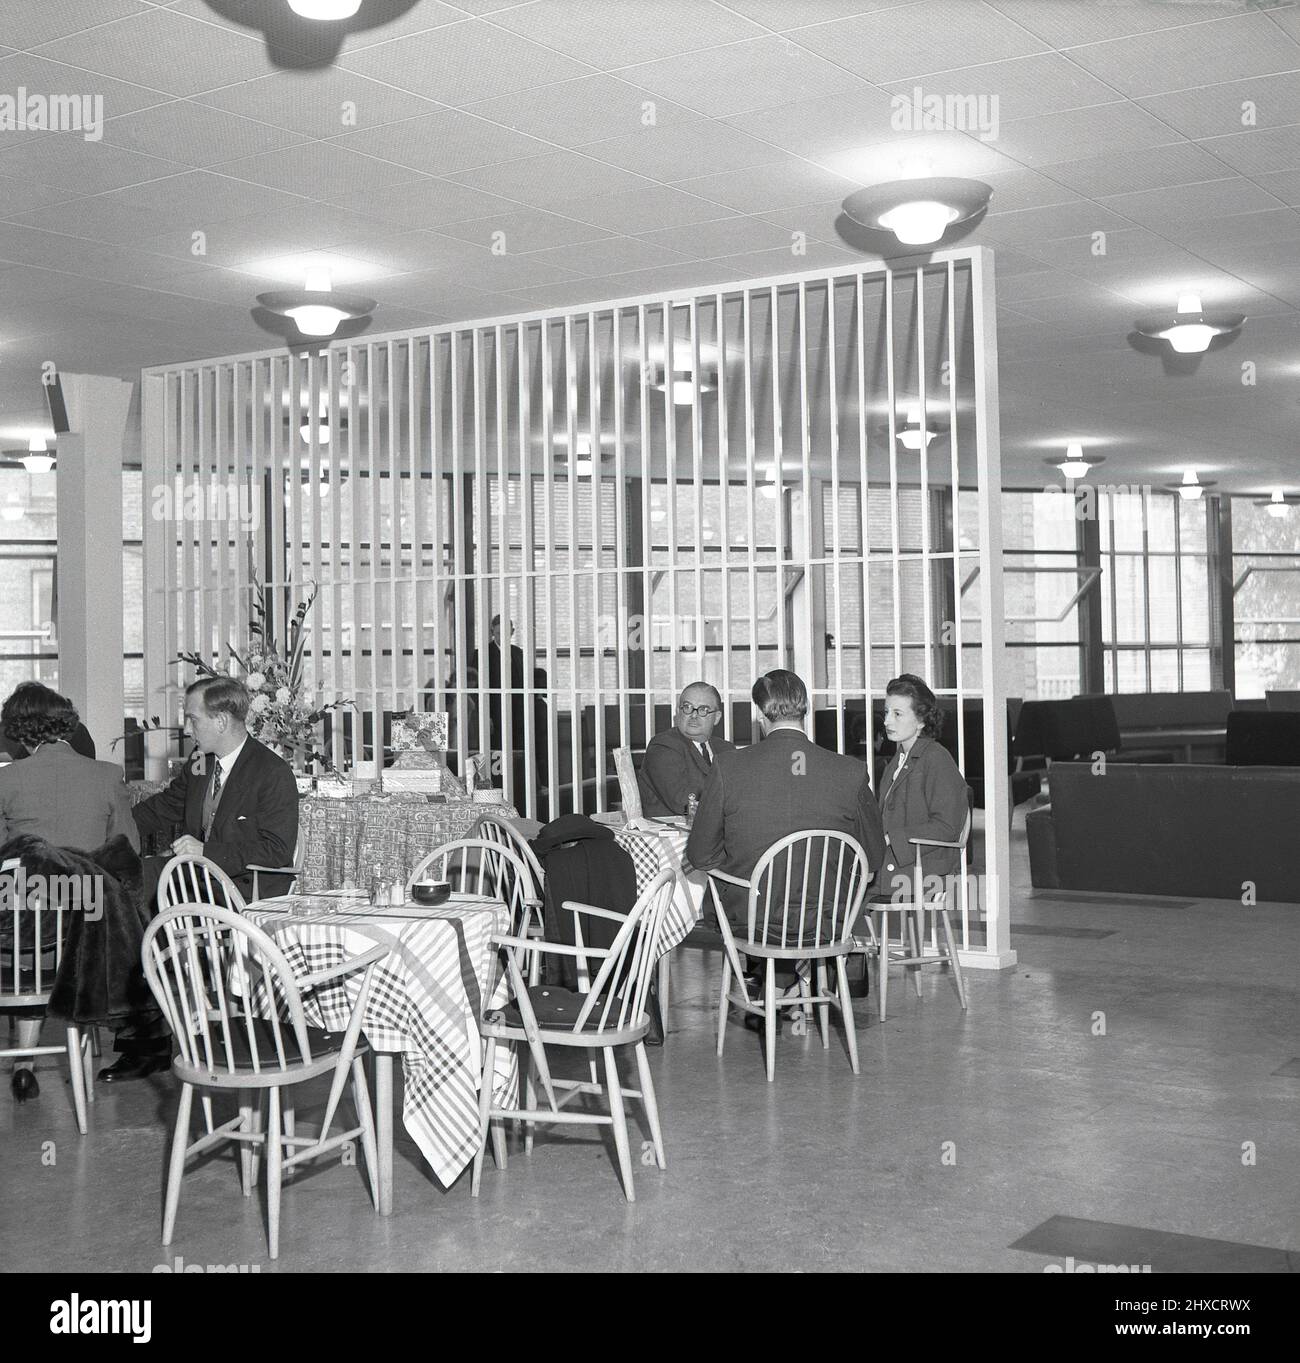 1957, historical, people sitting in an open cafe or refreshment area inside the new West London Air Terminal, Kensington, London, England, UK. The London terminal was a check-in facility for passengers travelling on British European Airways (BEA) flights from Heathrow Aiport and once checked in they would been taken to Heathrow by coach. Stock Photo